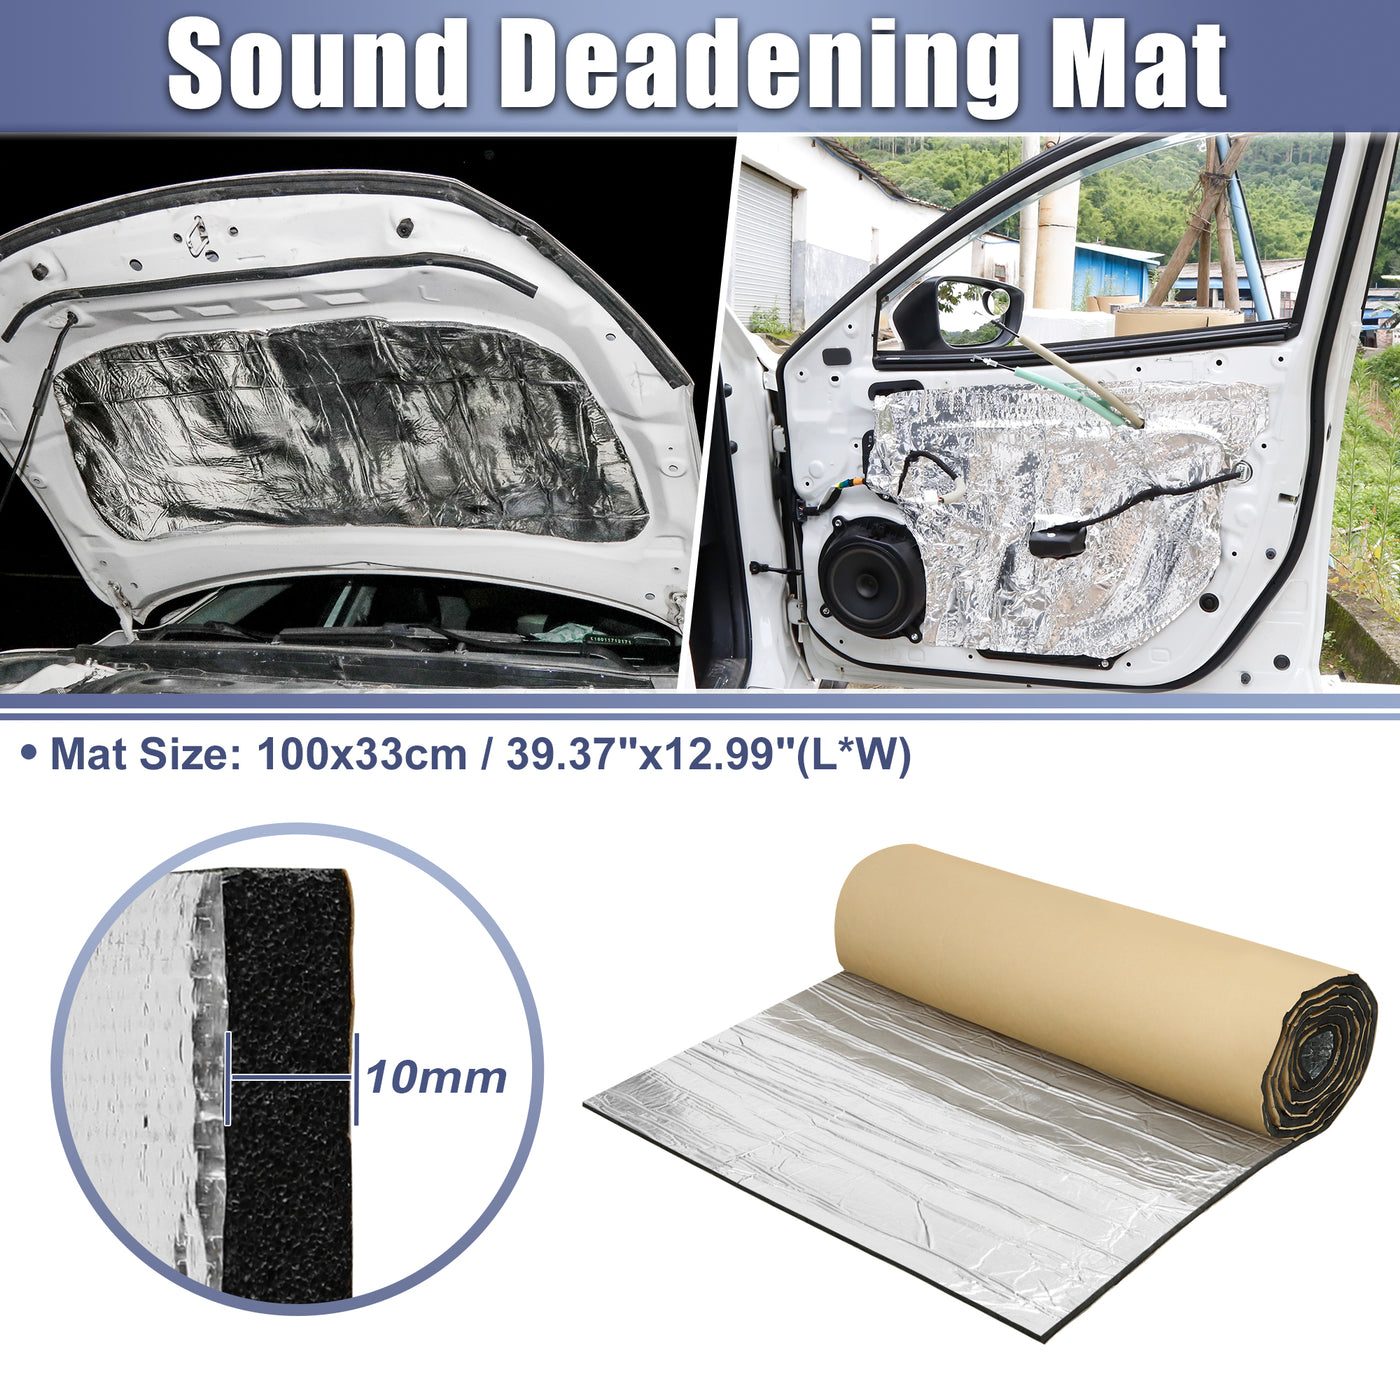 X AUTOHAUX 394mil 10mm 3.55sqft Car Sound Deadening Mat Glassfiber Closed Cell Foam Heat Shield Material Damping Self Adhesive Universal for Hood Fender and Boat Engine Cover 39.37"x12.99"